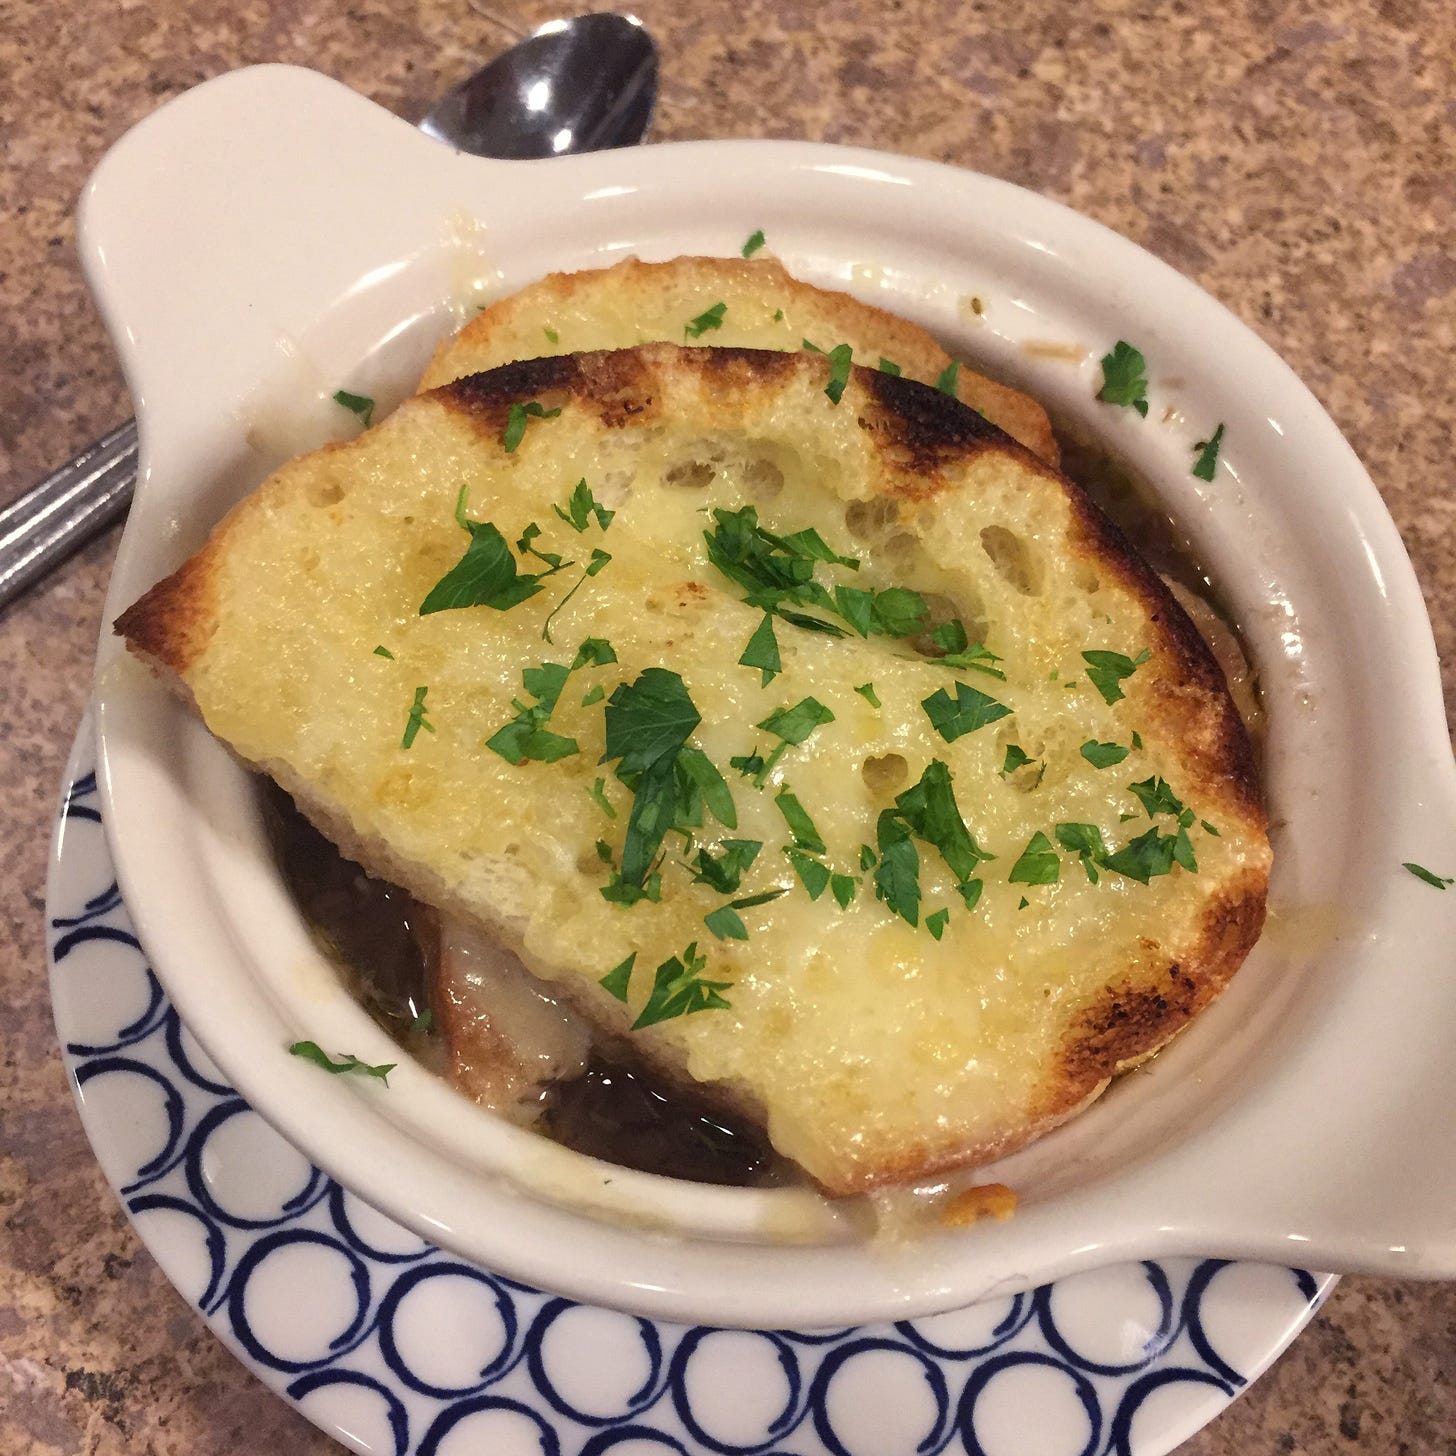 A white French onion soup bowl sits on a small blue and white plate with a spoon beside it. On top of the soup are two halves of a slice of bread, browned and with melted cheese, and a dusting of parsley.